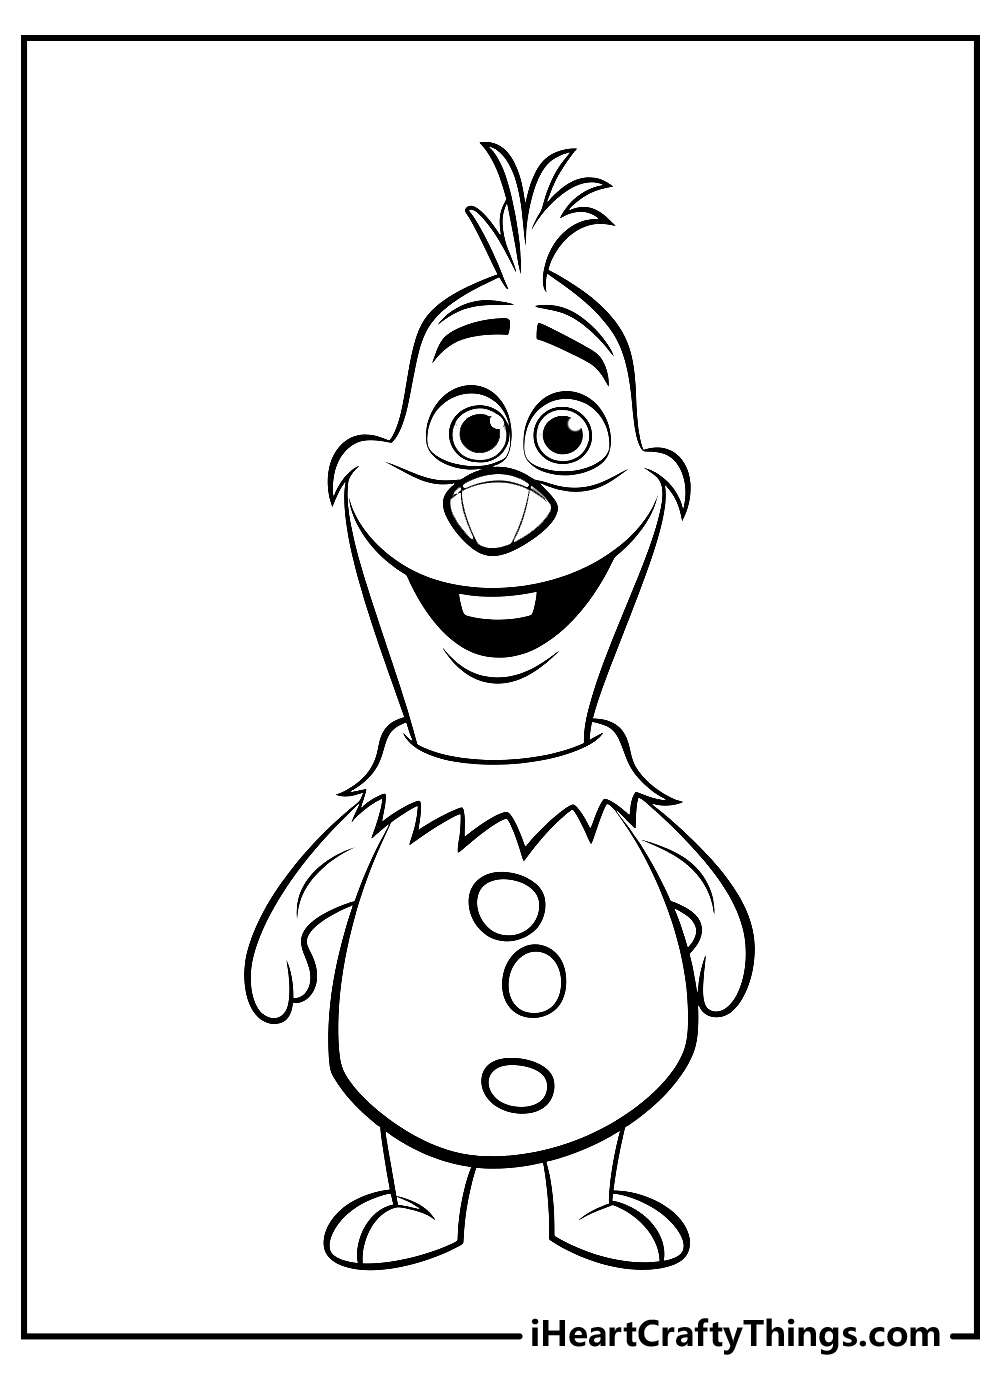 olaf from frozen coloring pages